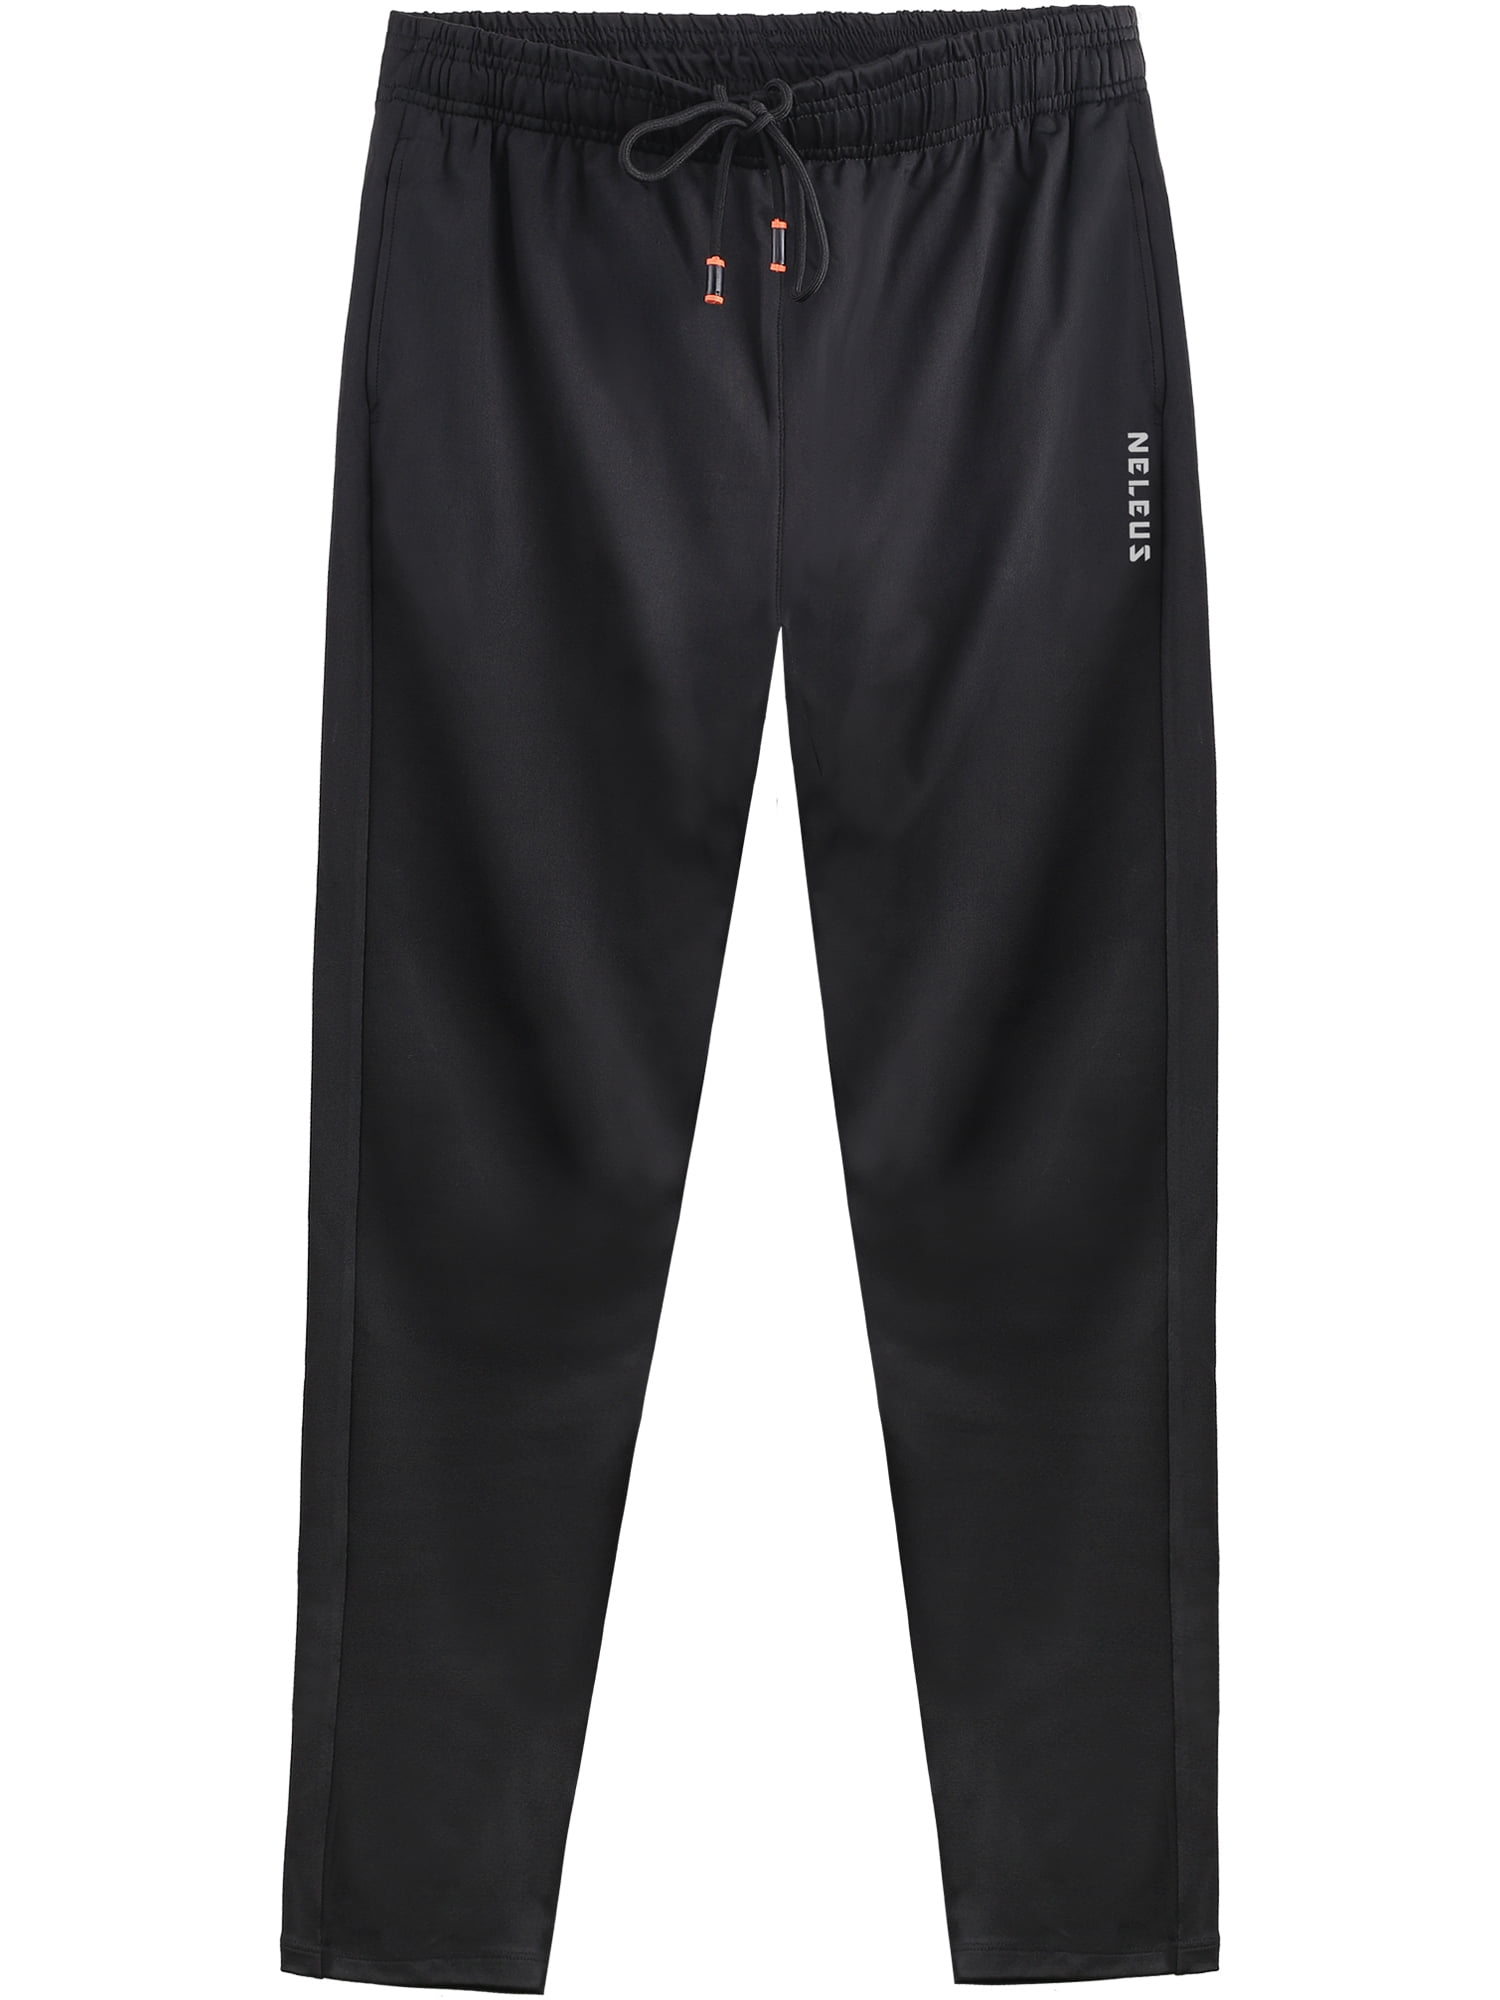 NELEUS Men's Workout Athletic Pants Running Sweatpants With Pockets Relaxed  Fit,Black+Black,US Size XL